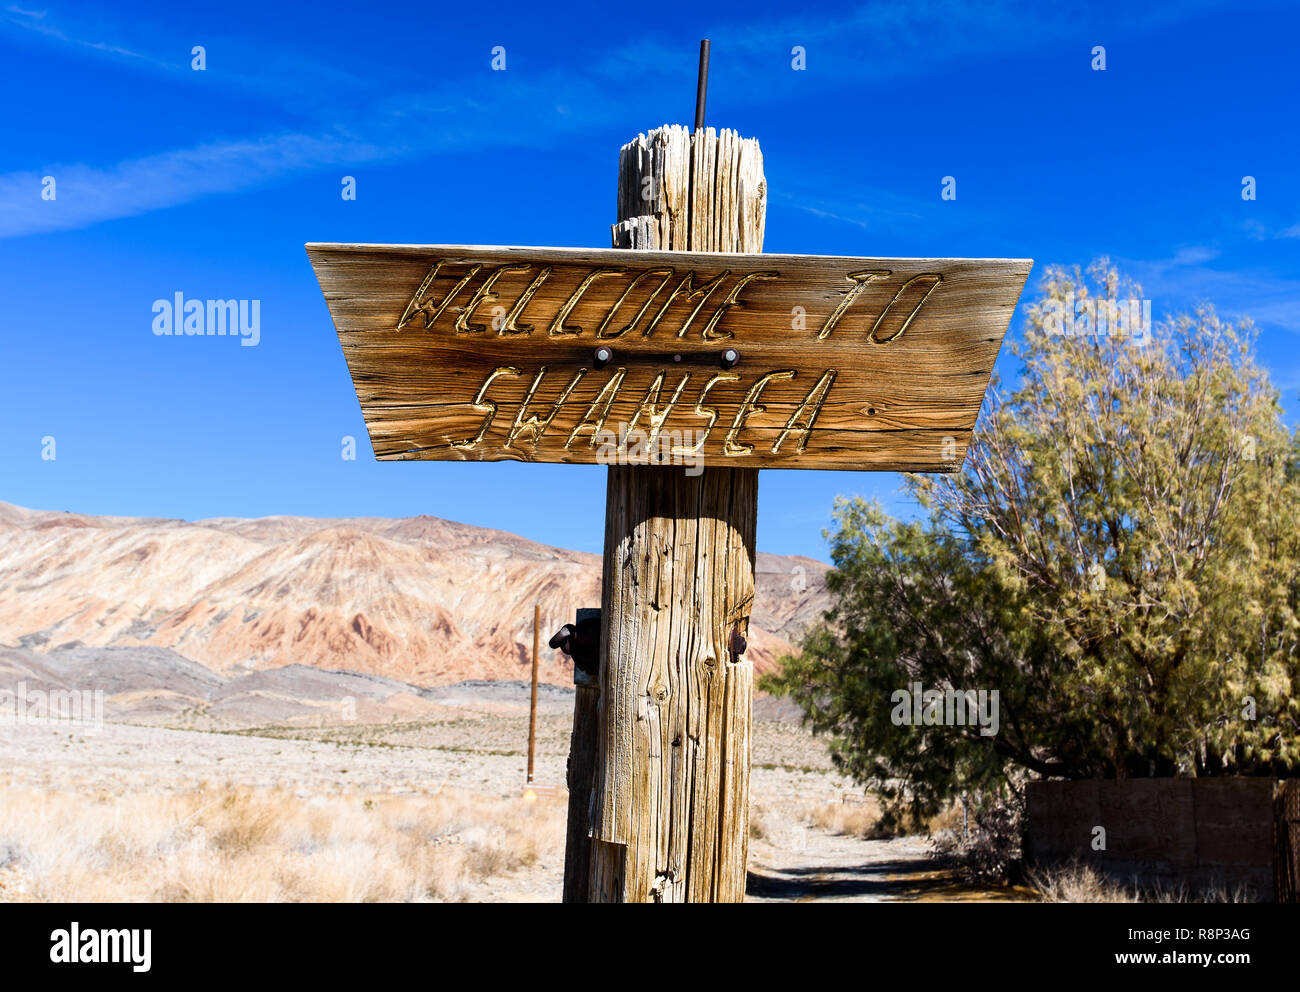 Wooden sign marking the former silver smelting boomtown, now a ghost town in California Stock Photo